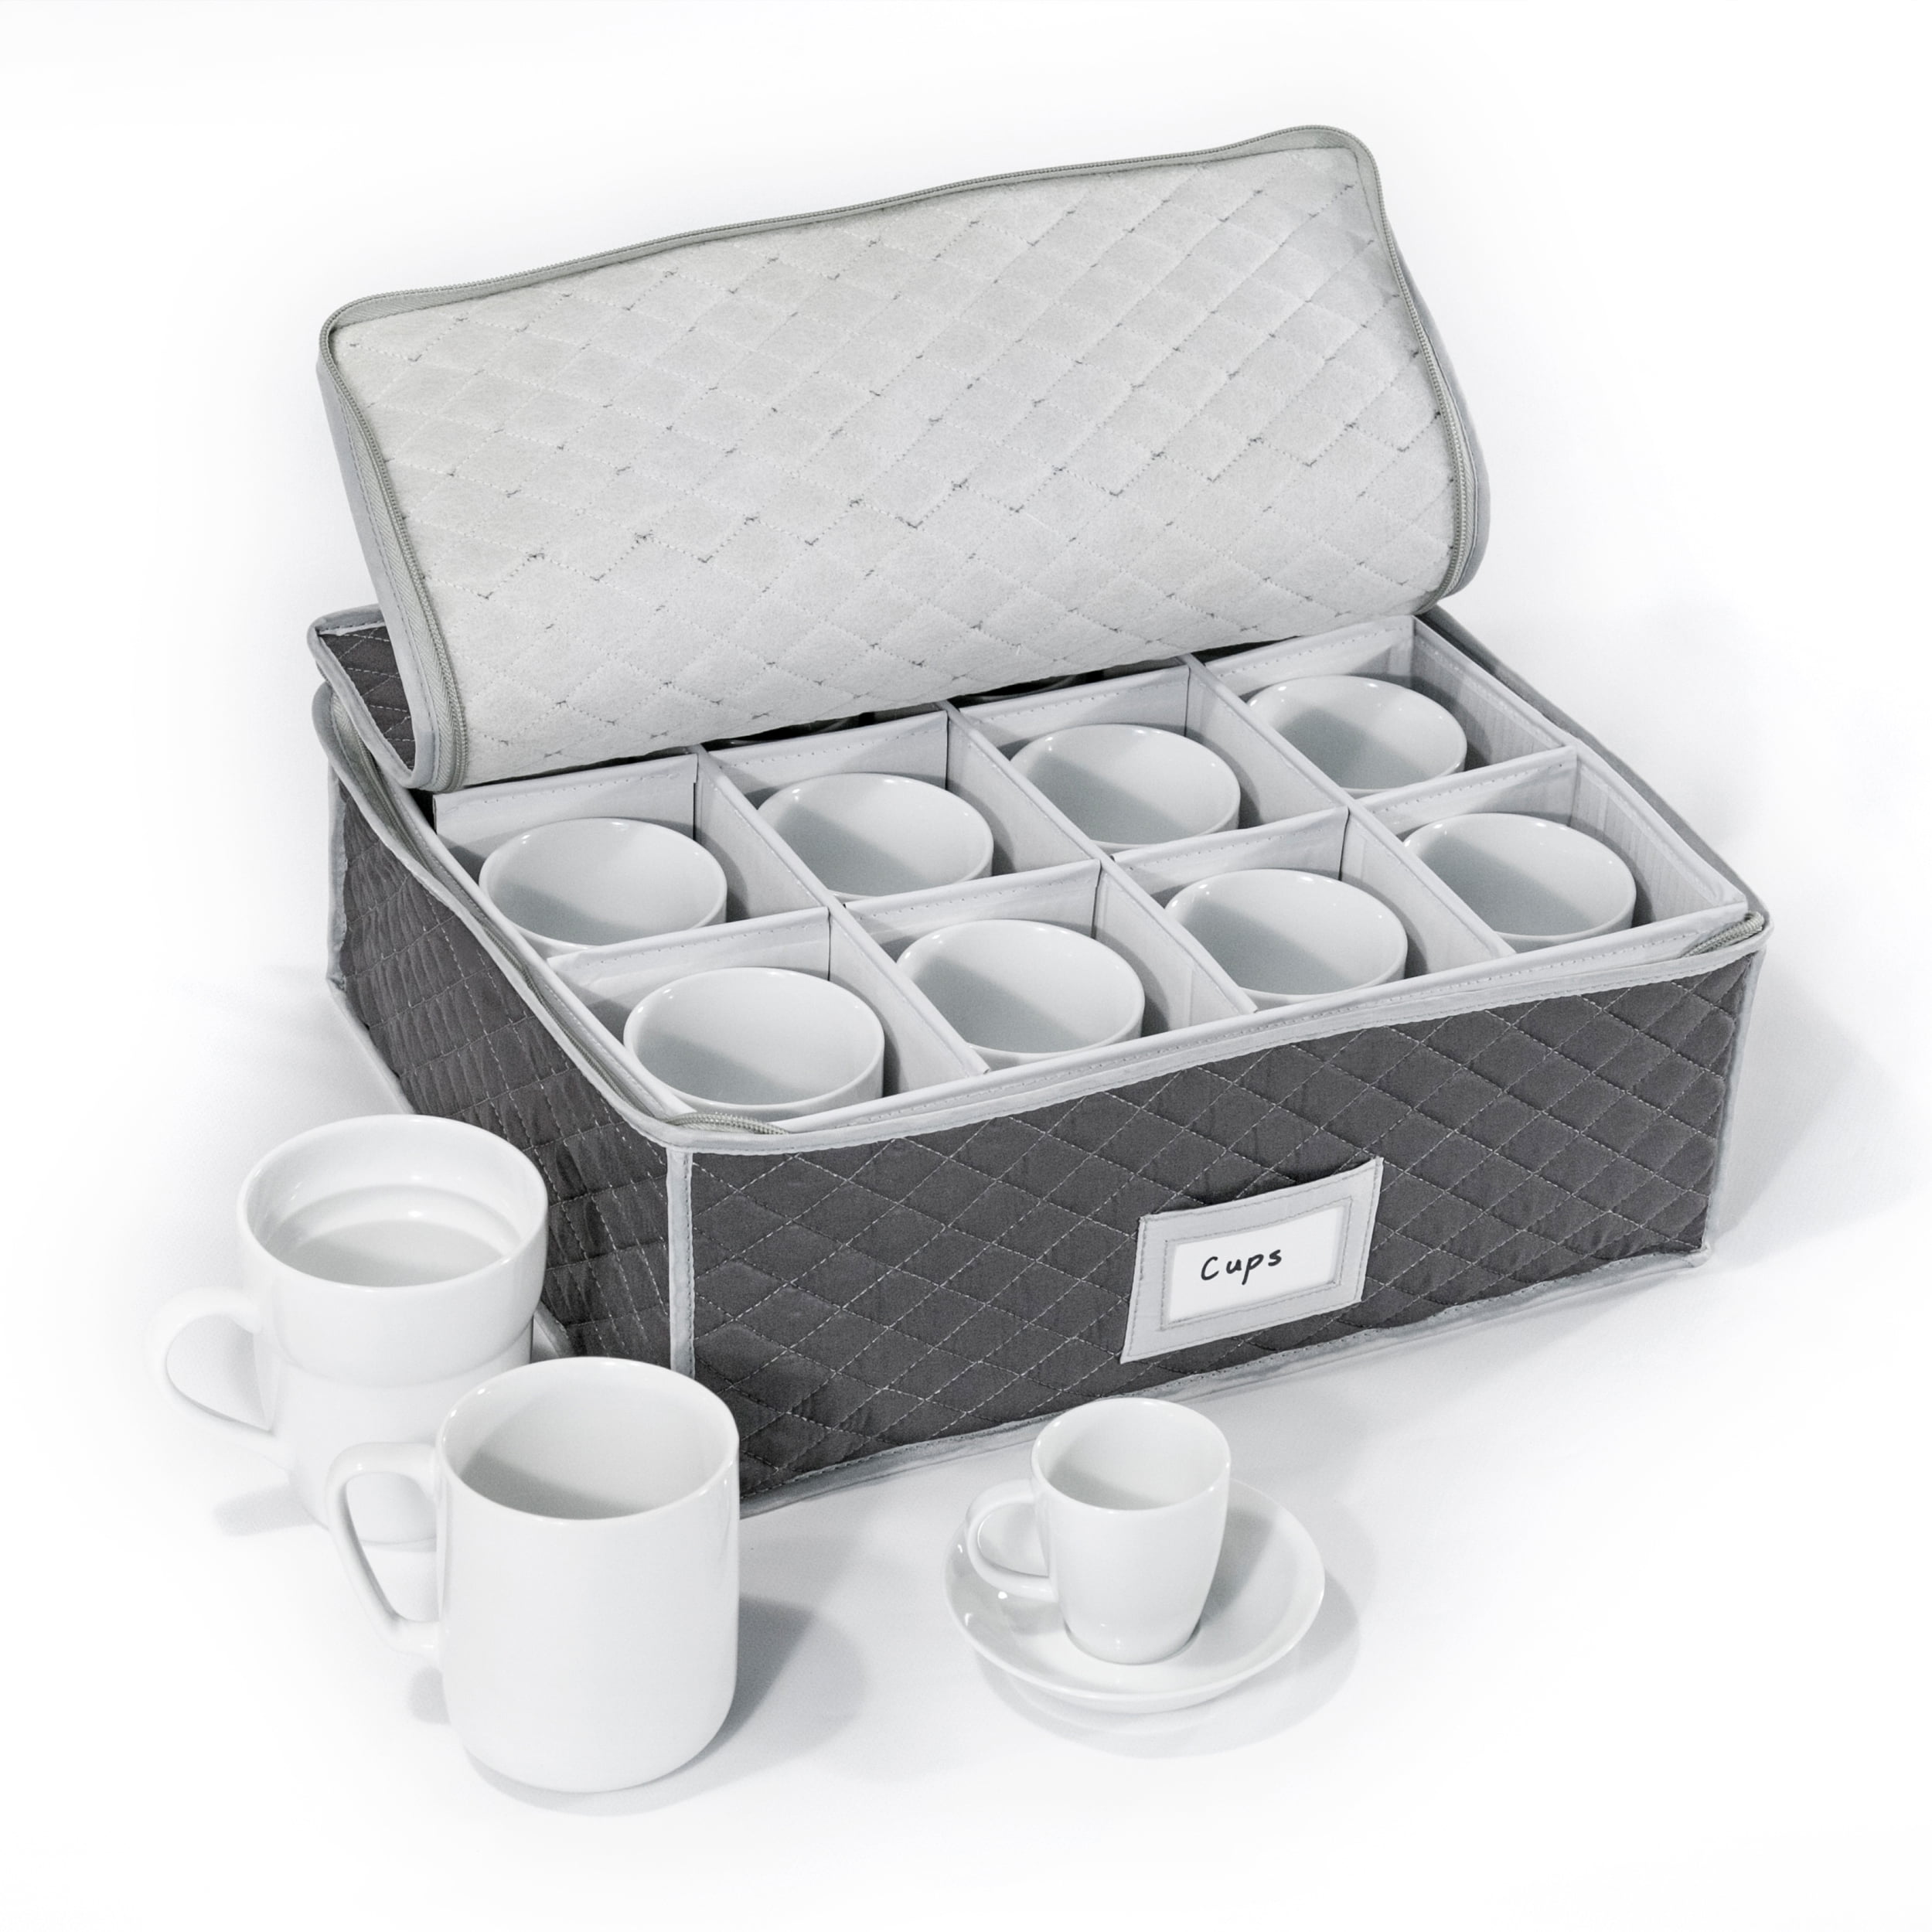 China Cup Storage Chest - Quilted Fabric Container in Gray Measuring 16 x  13 x 6H - Perfect Storage Case for Coffee Cups - Tea Cups - Mugs